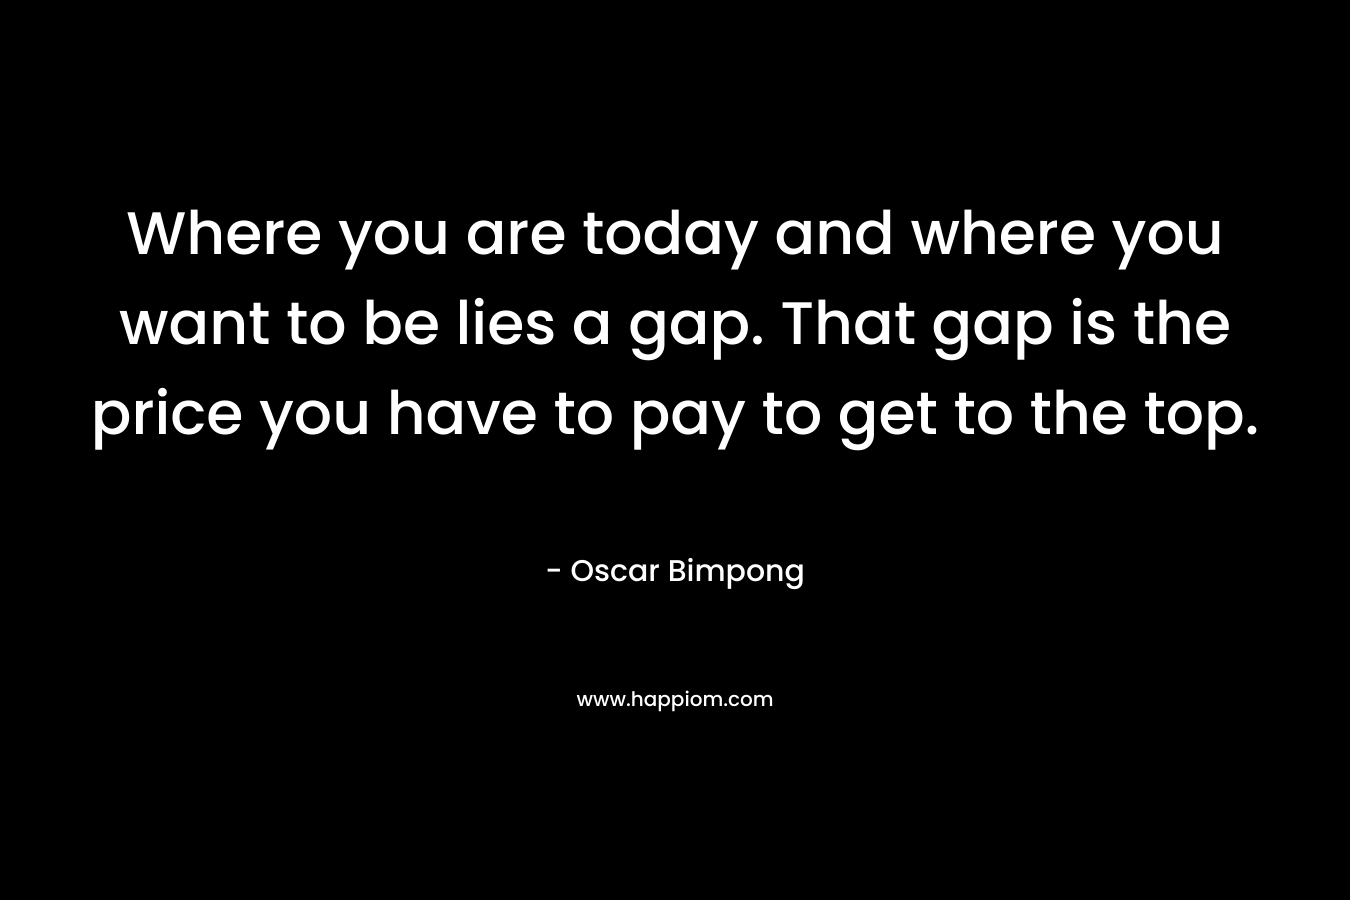 Where you are today and where you want to be lies a gap. That gap is the price you have to pay to get to the top. – Oscar Bimpong